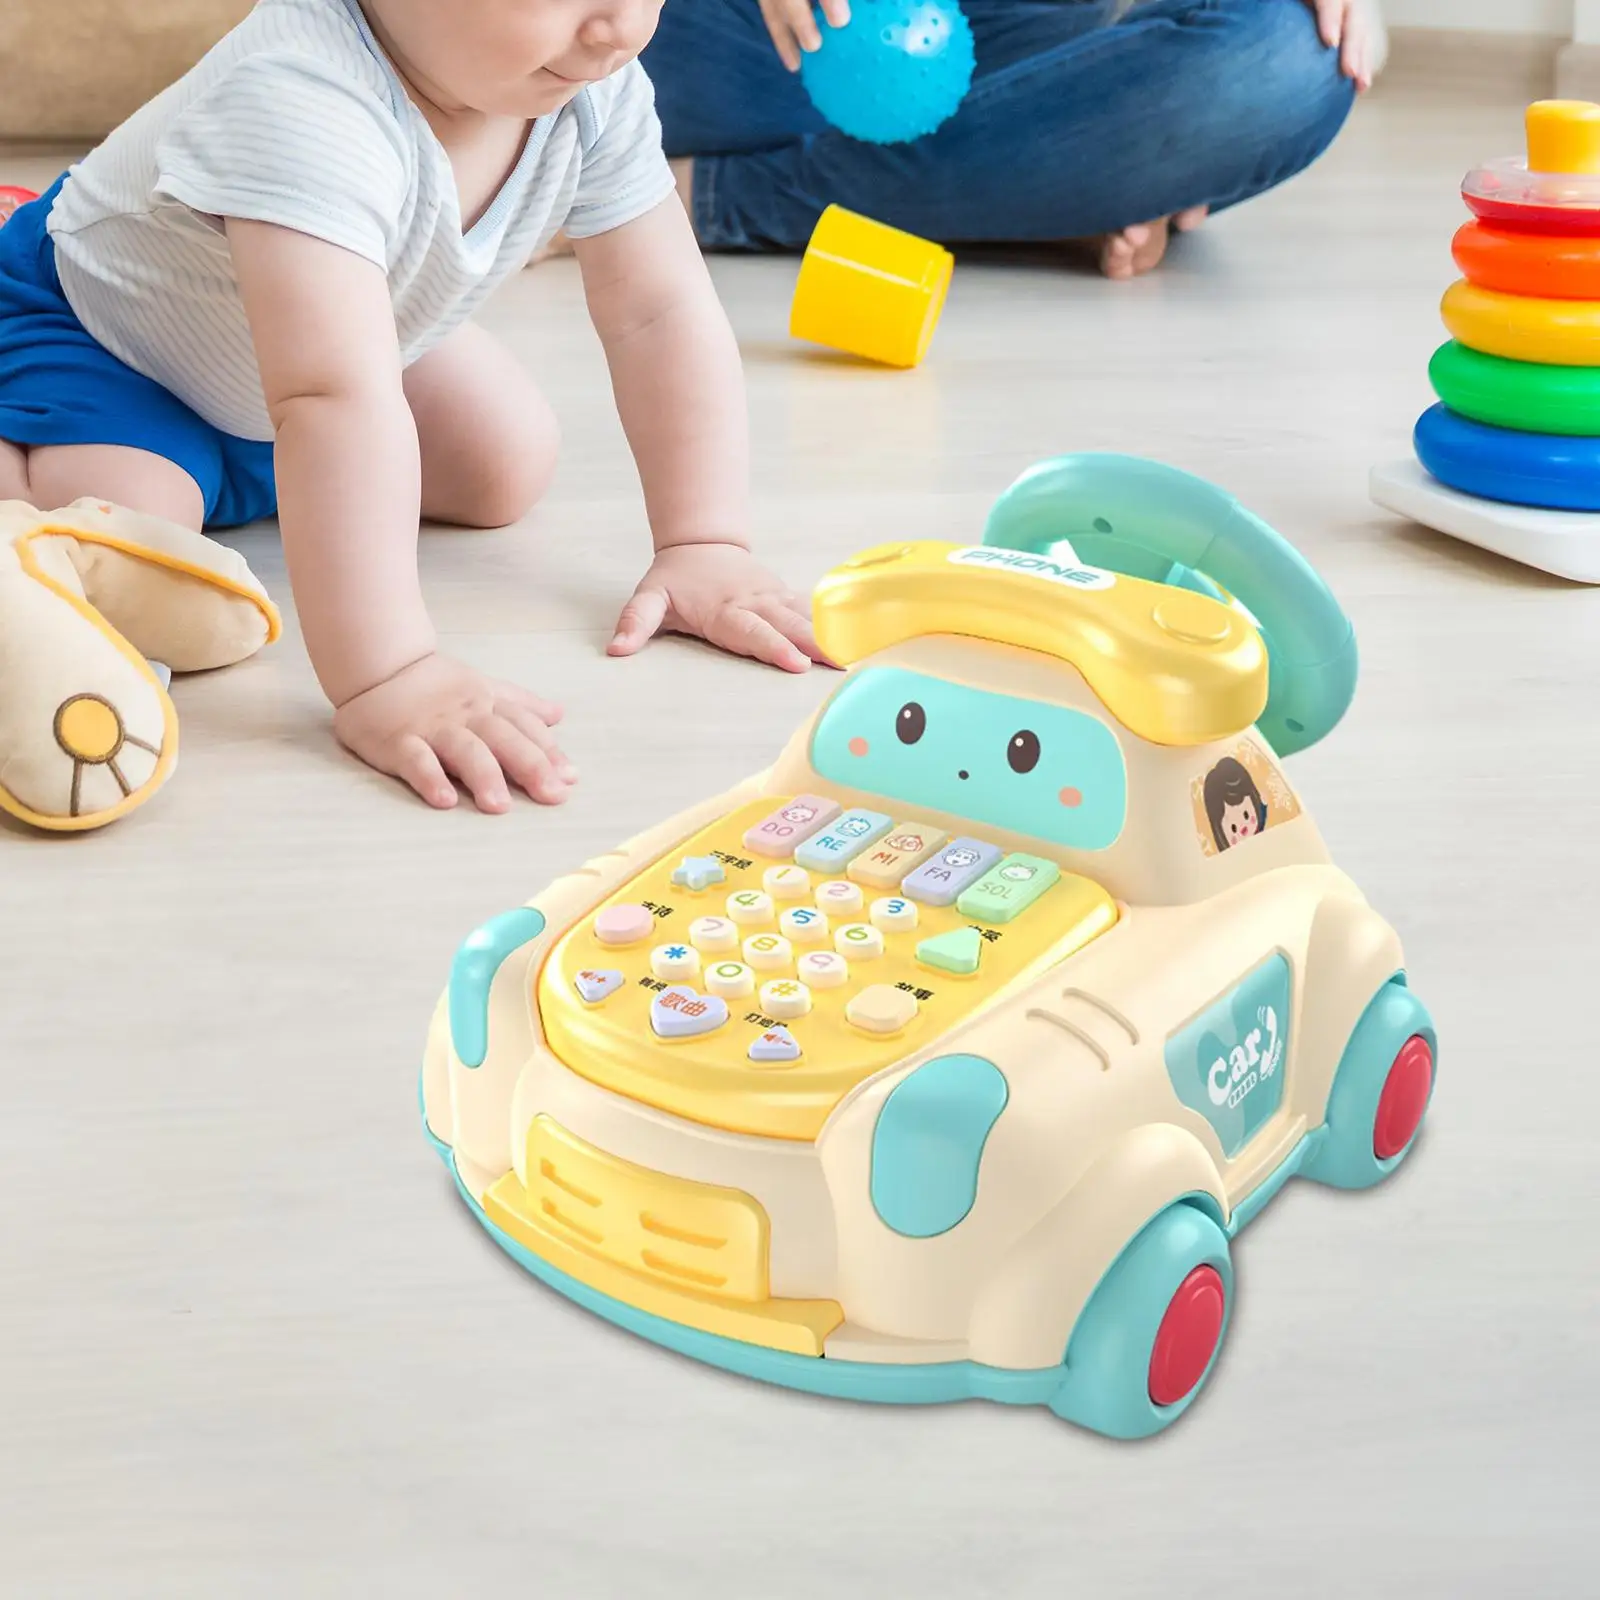 toddlers Steering Wheel car Motor Skills Pretend Play Music Light Phone Toy for Game Interaction Development Activity